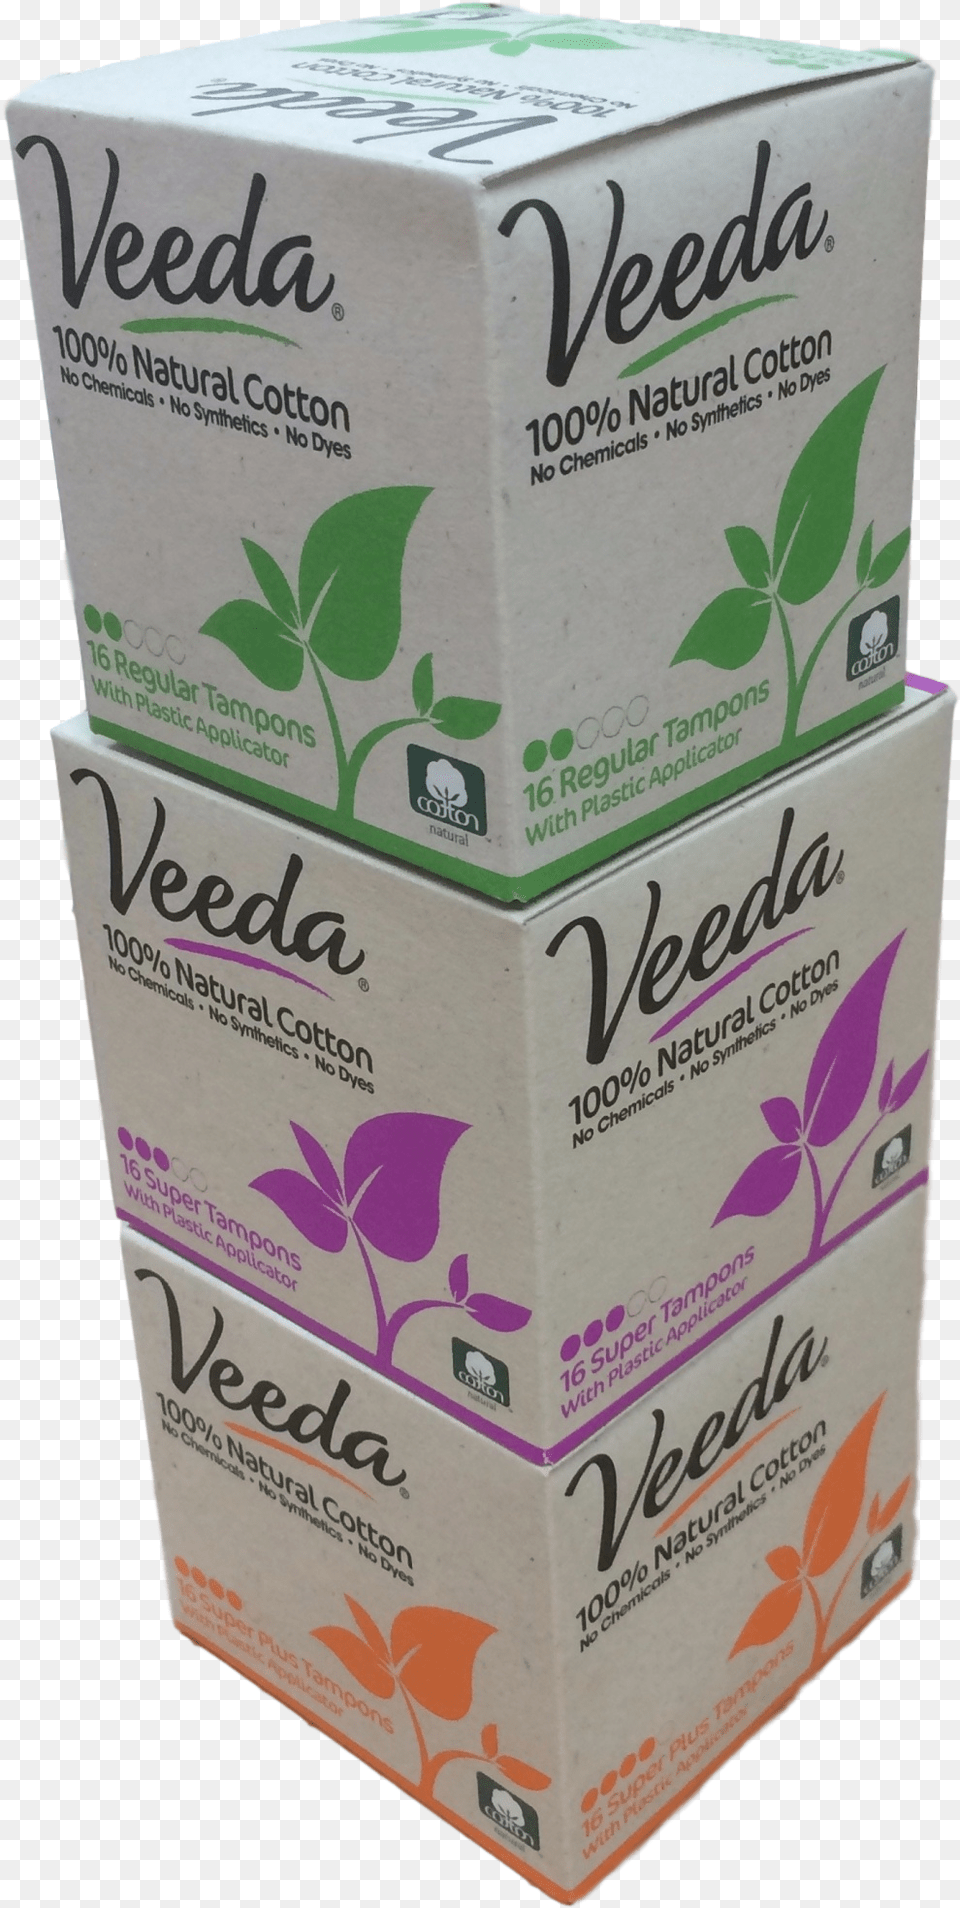 Natural Cotton Tampons Veeda Natural Cotton Tampons With Applicator, Box, Herbal, Herbs, Plant Free Png